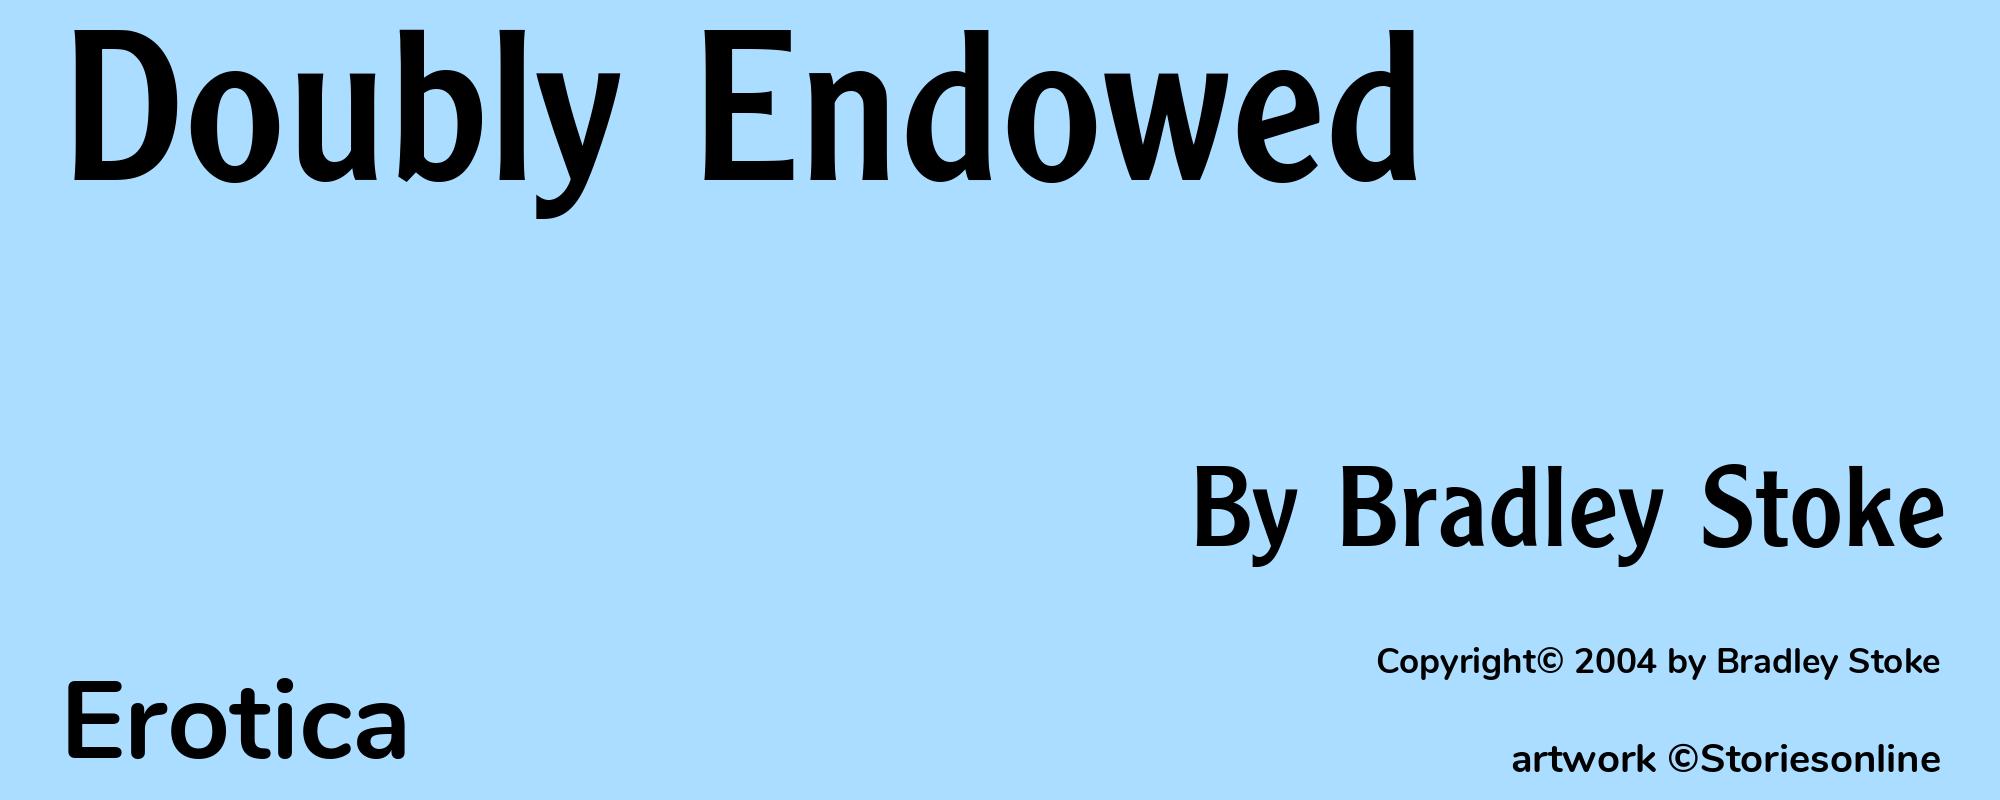 Doubly Endowed - Cover